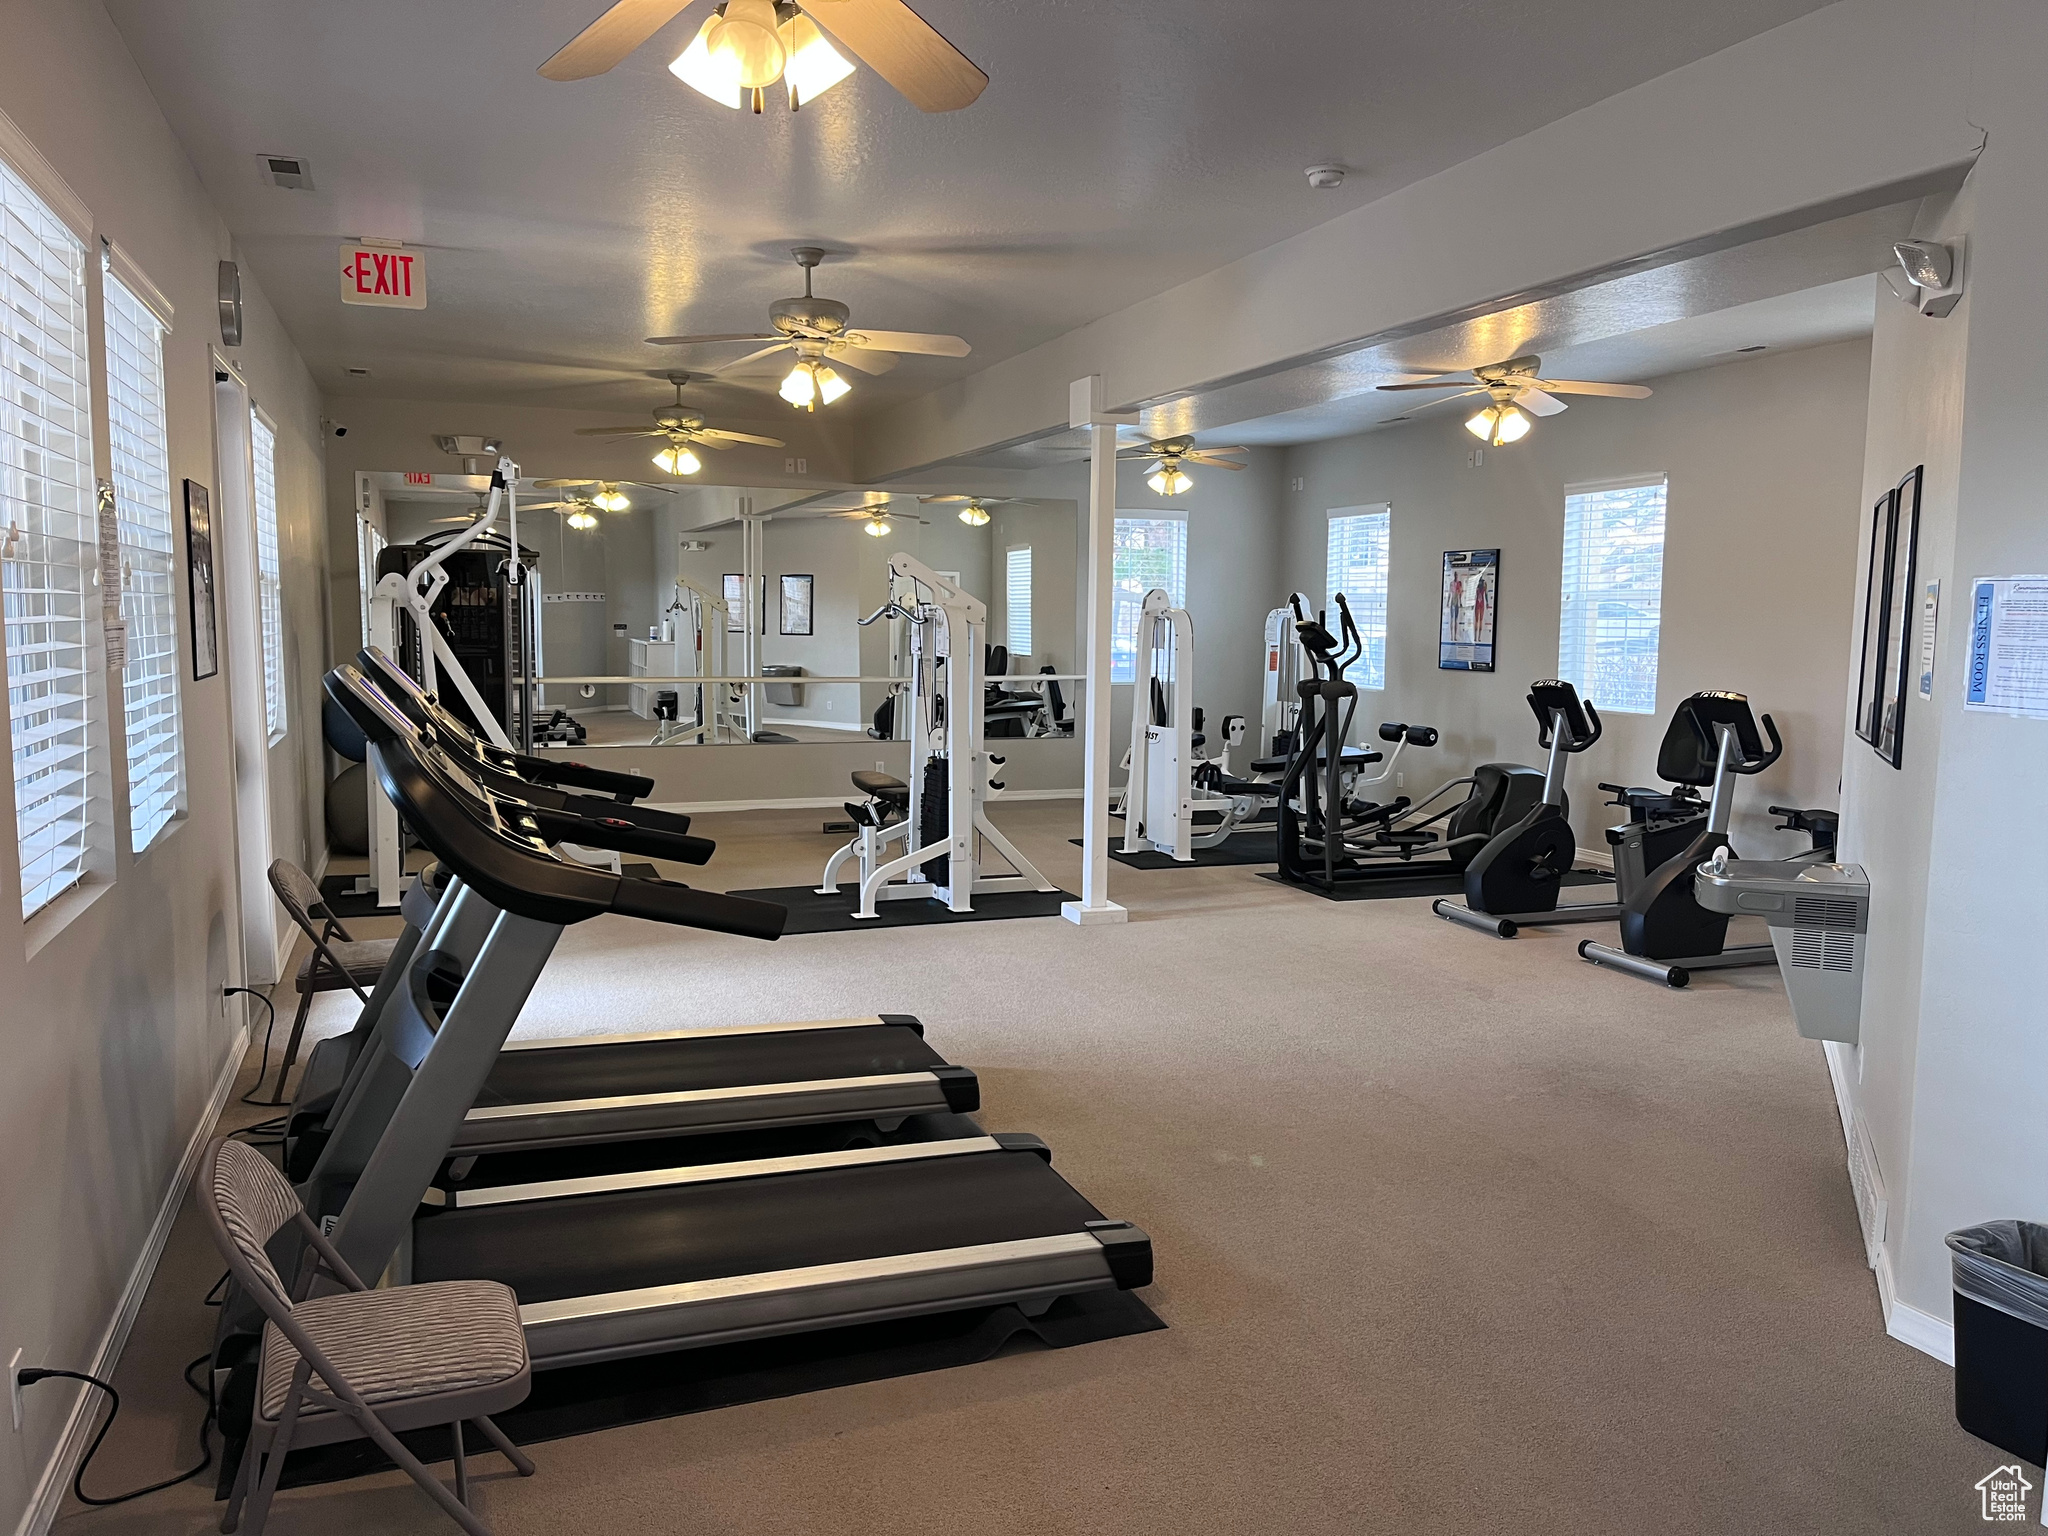 Exercise room for your convenience in the community center